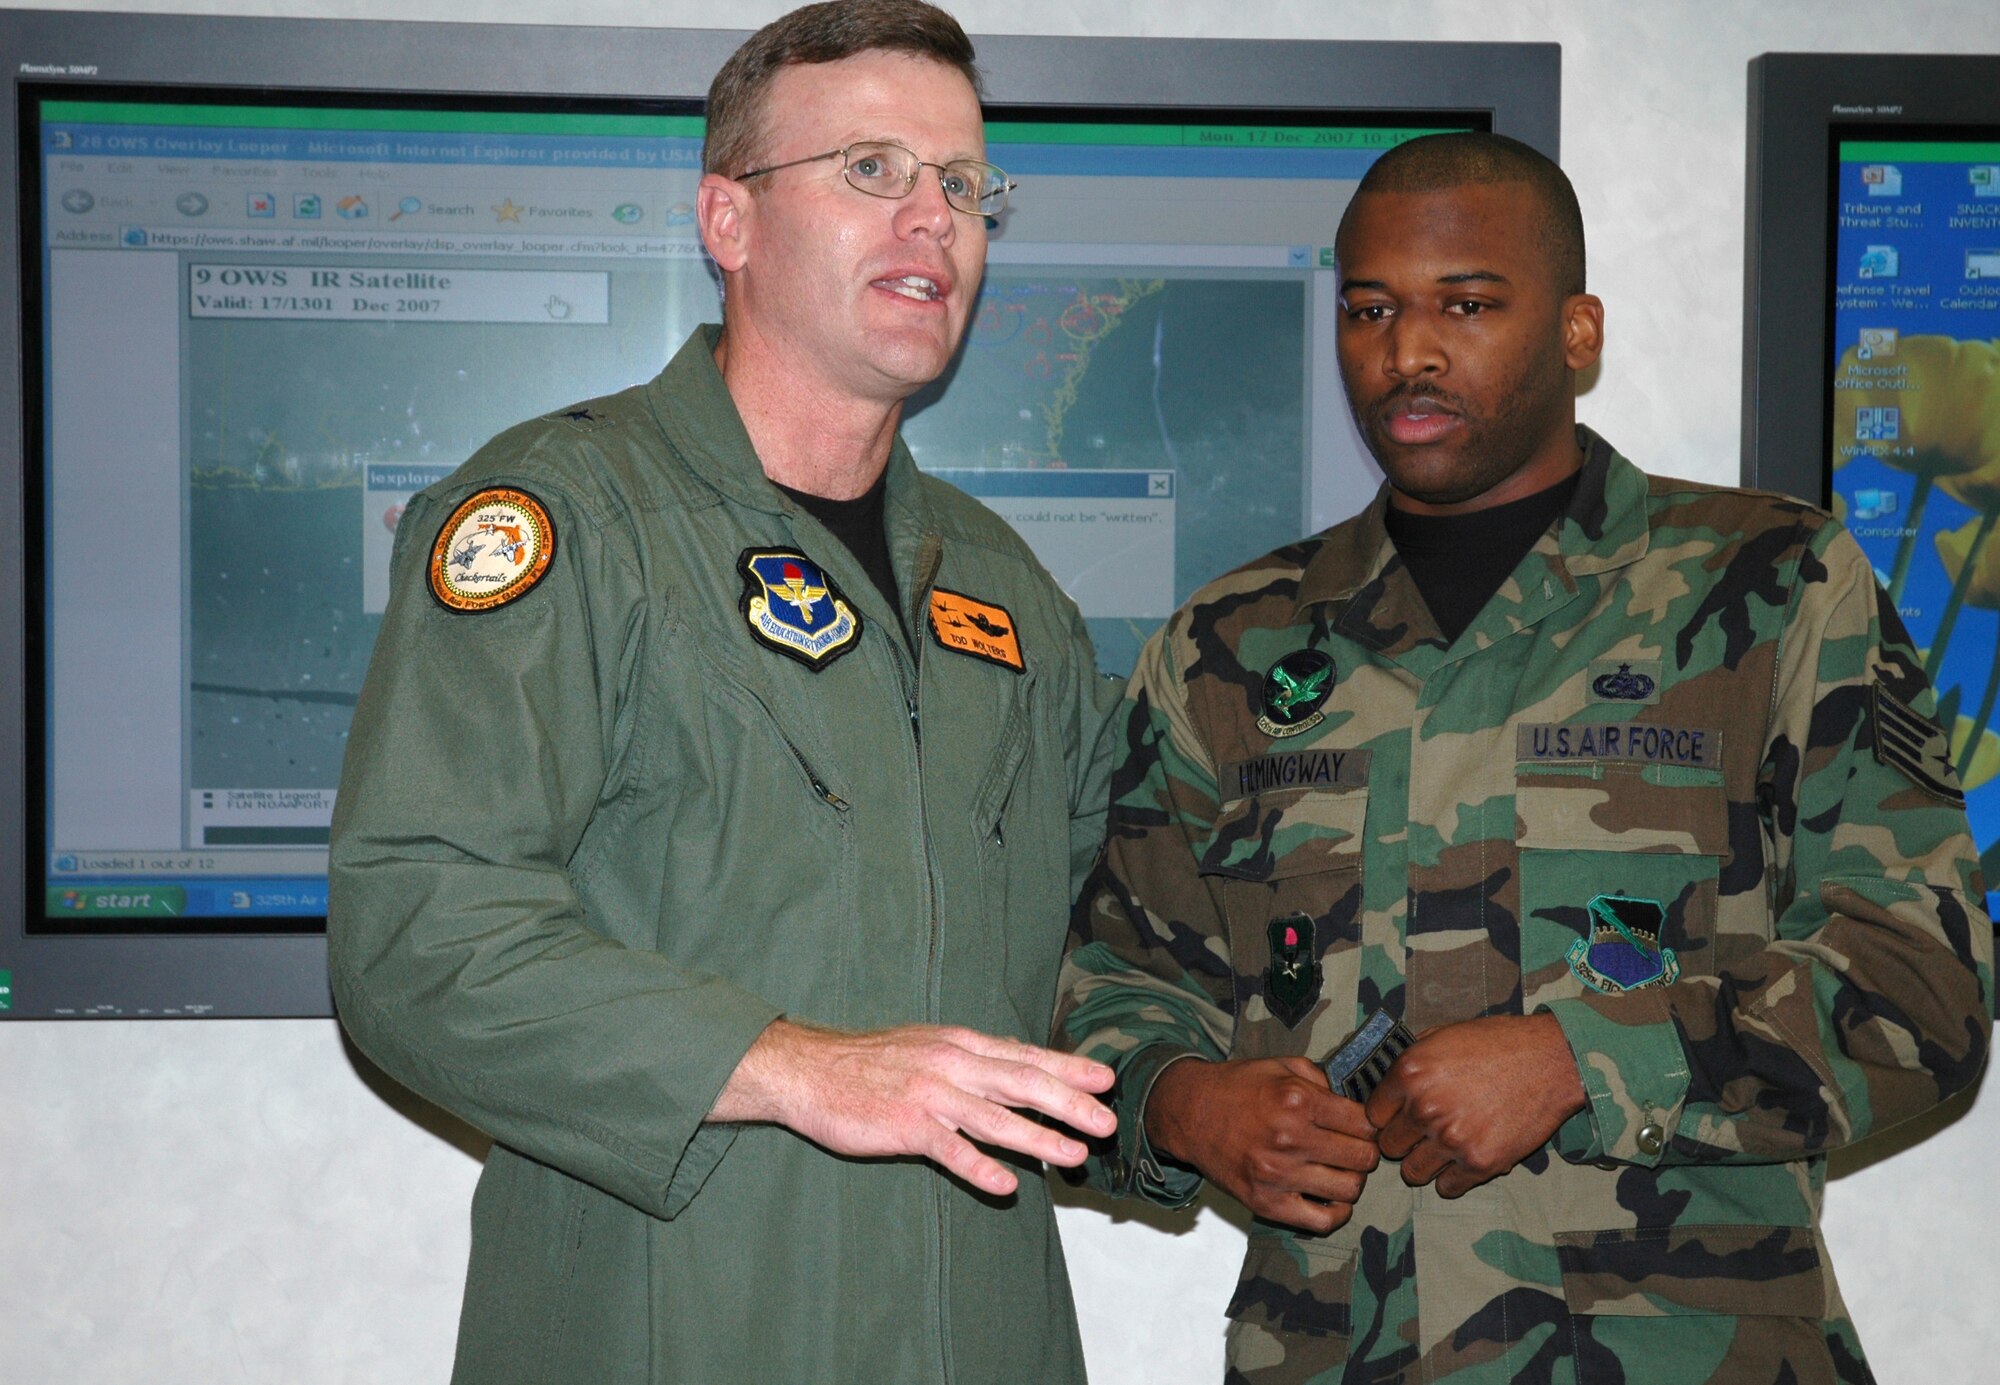 Brig. Gen. Tod Wolters, 325th Fighter Wing commander, adresses the 325th Air Control Squadron upon presenting Staff Sgt. Antenney Hemingway, 325th ACS NCO in charge of supply with two technical sergeant chevrons for his promtion under the Stripes for Exceptional Performers program.  General Wolters STEP promoted three individuals on Dec. 17 along with Chief Master Sgt. Benjamin Van Vleet, 325th Fighter Wing command chief master sergeant.  (U.S. Air Force photo/Staff Sgt. Timothy R. Capling)